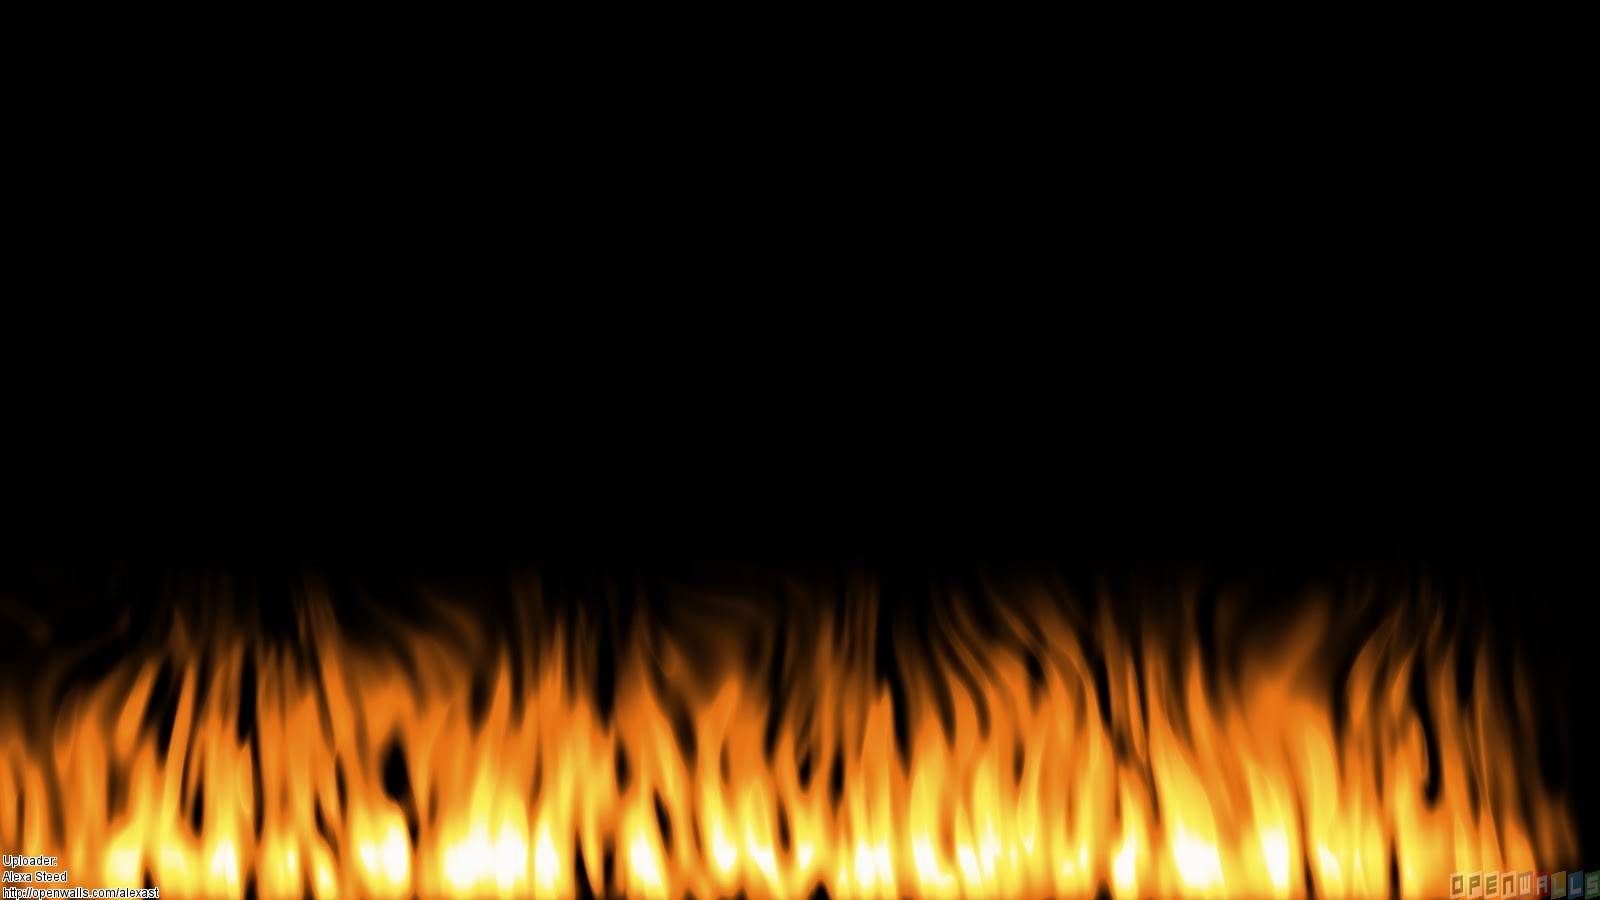 Flames on the black background wallpaper 6830   Open Walls 1600x900